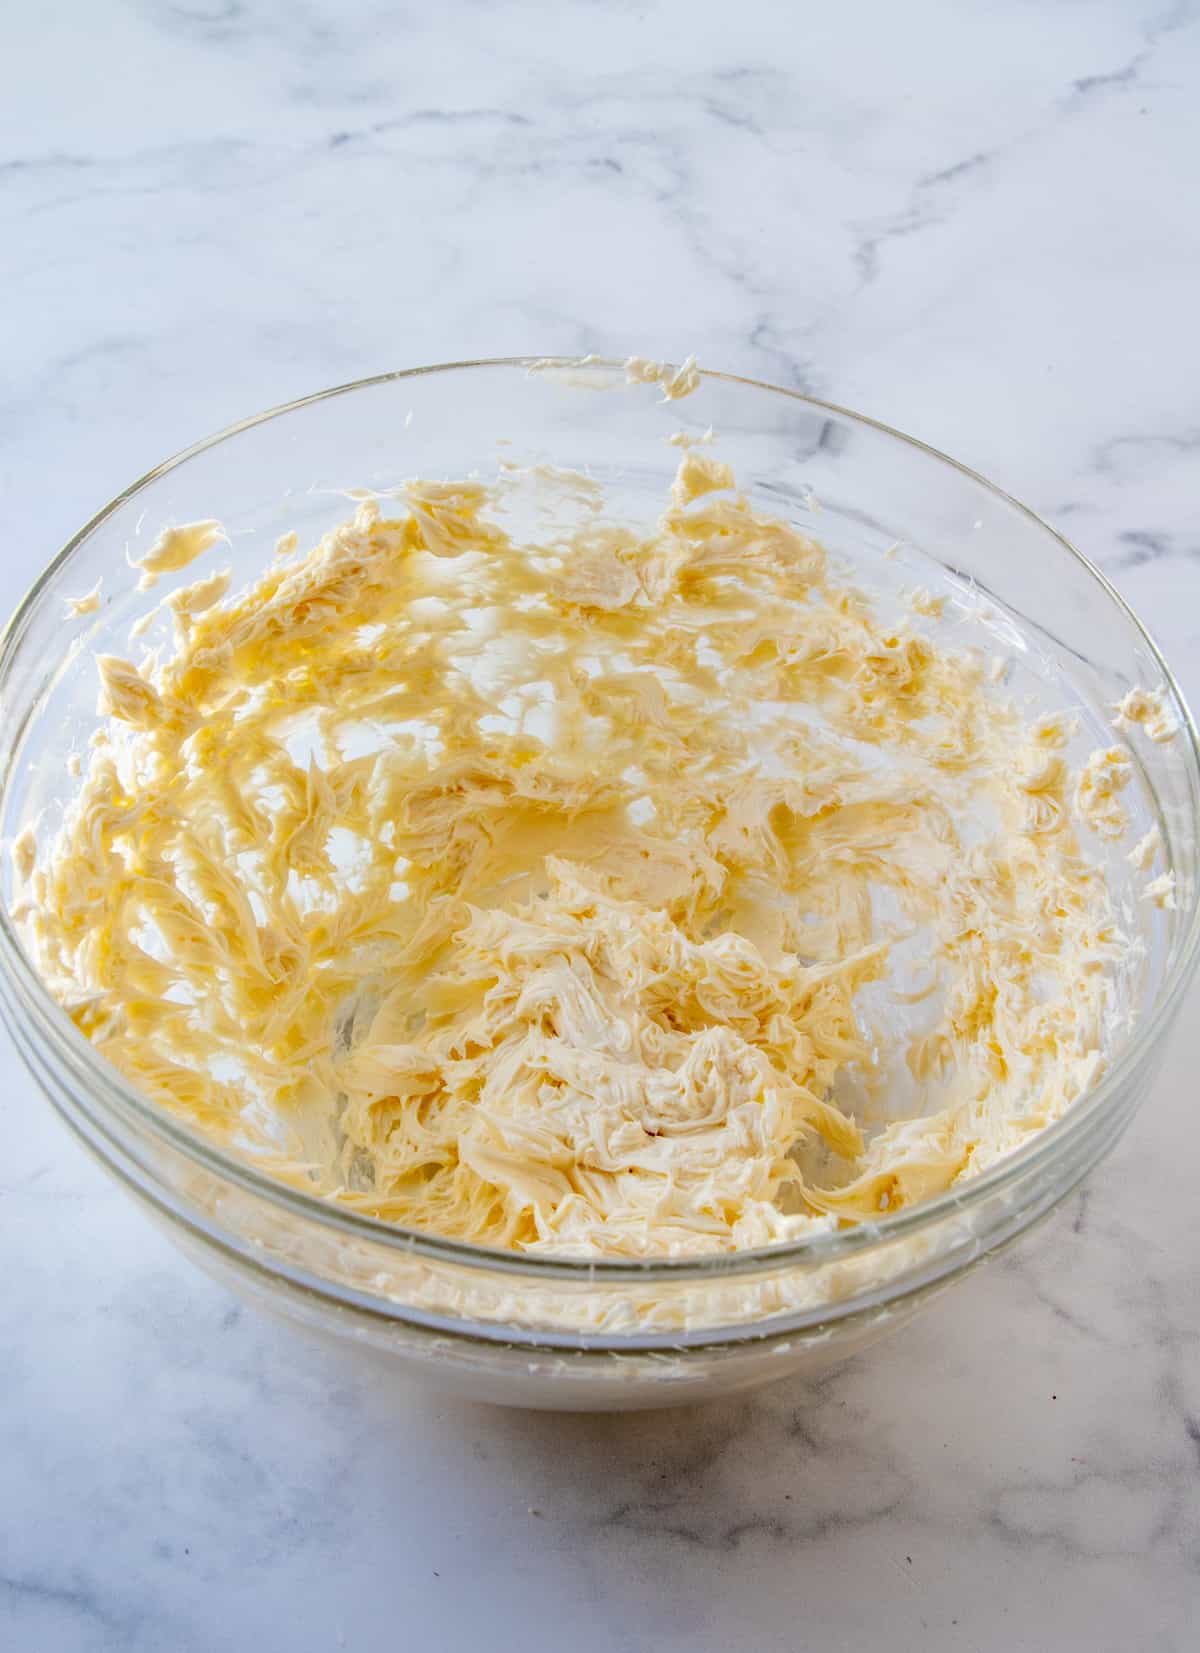 Butter and sugar that have been mixed together in a clear bowl.